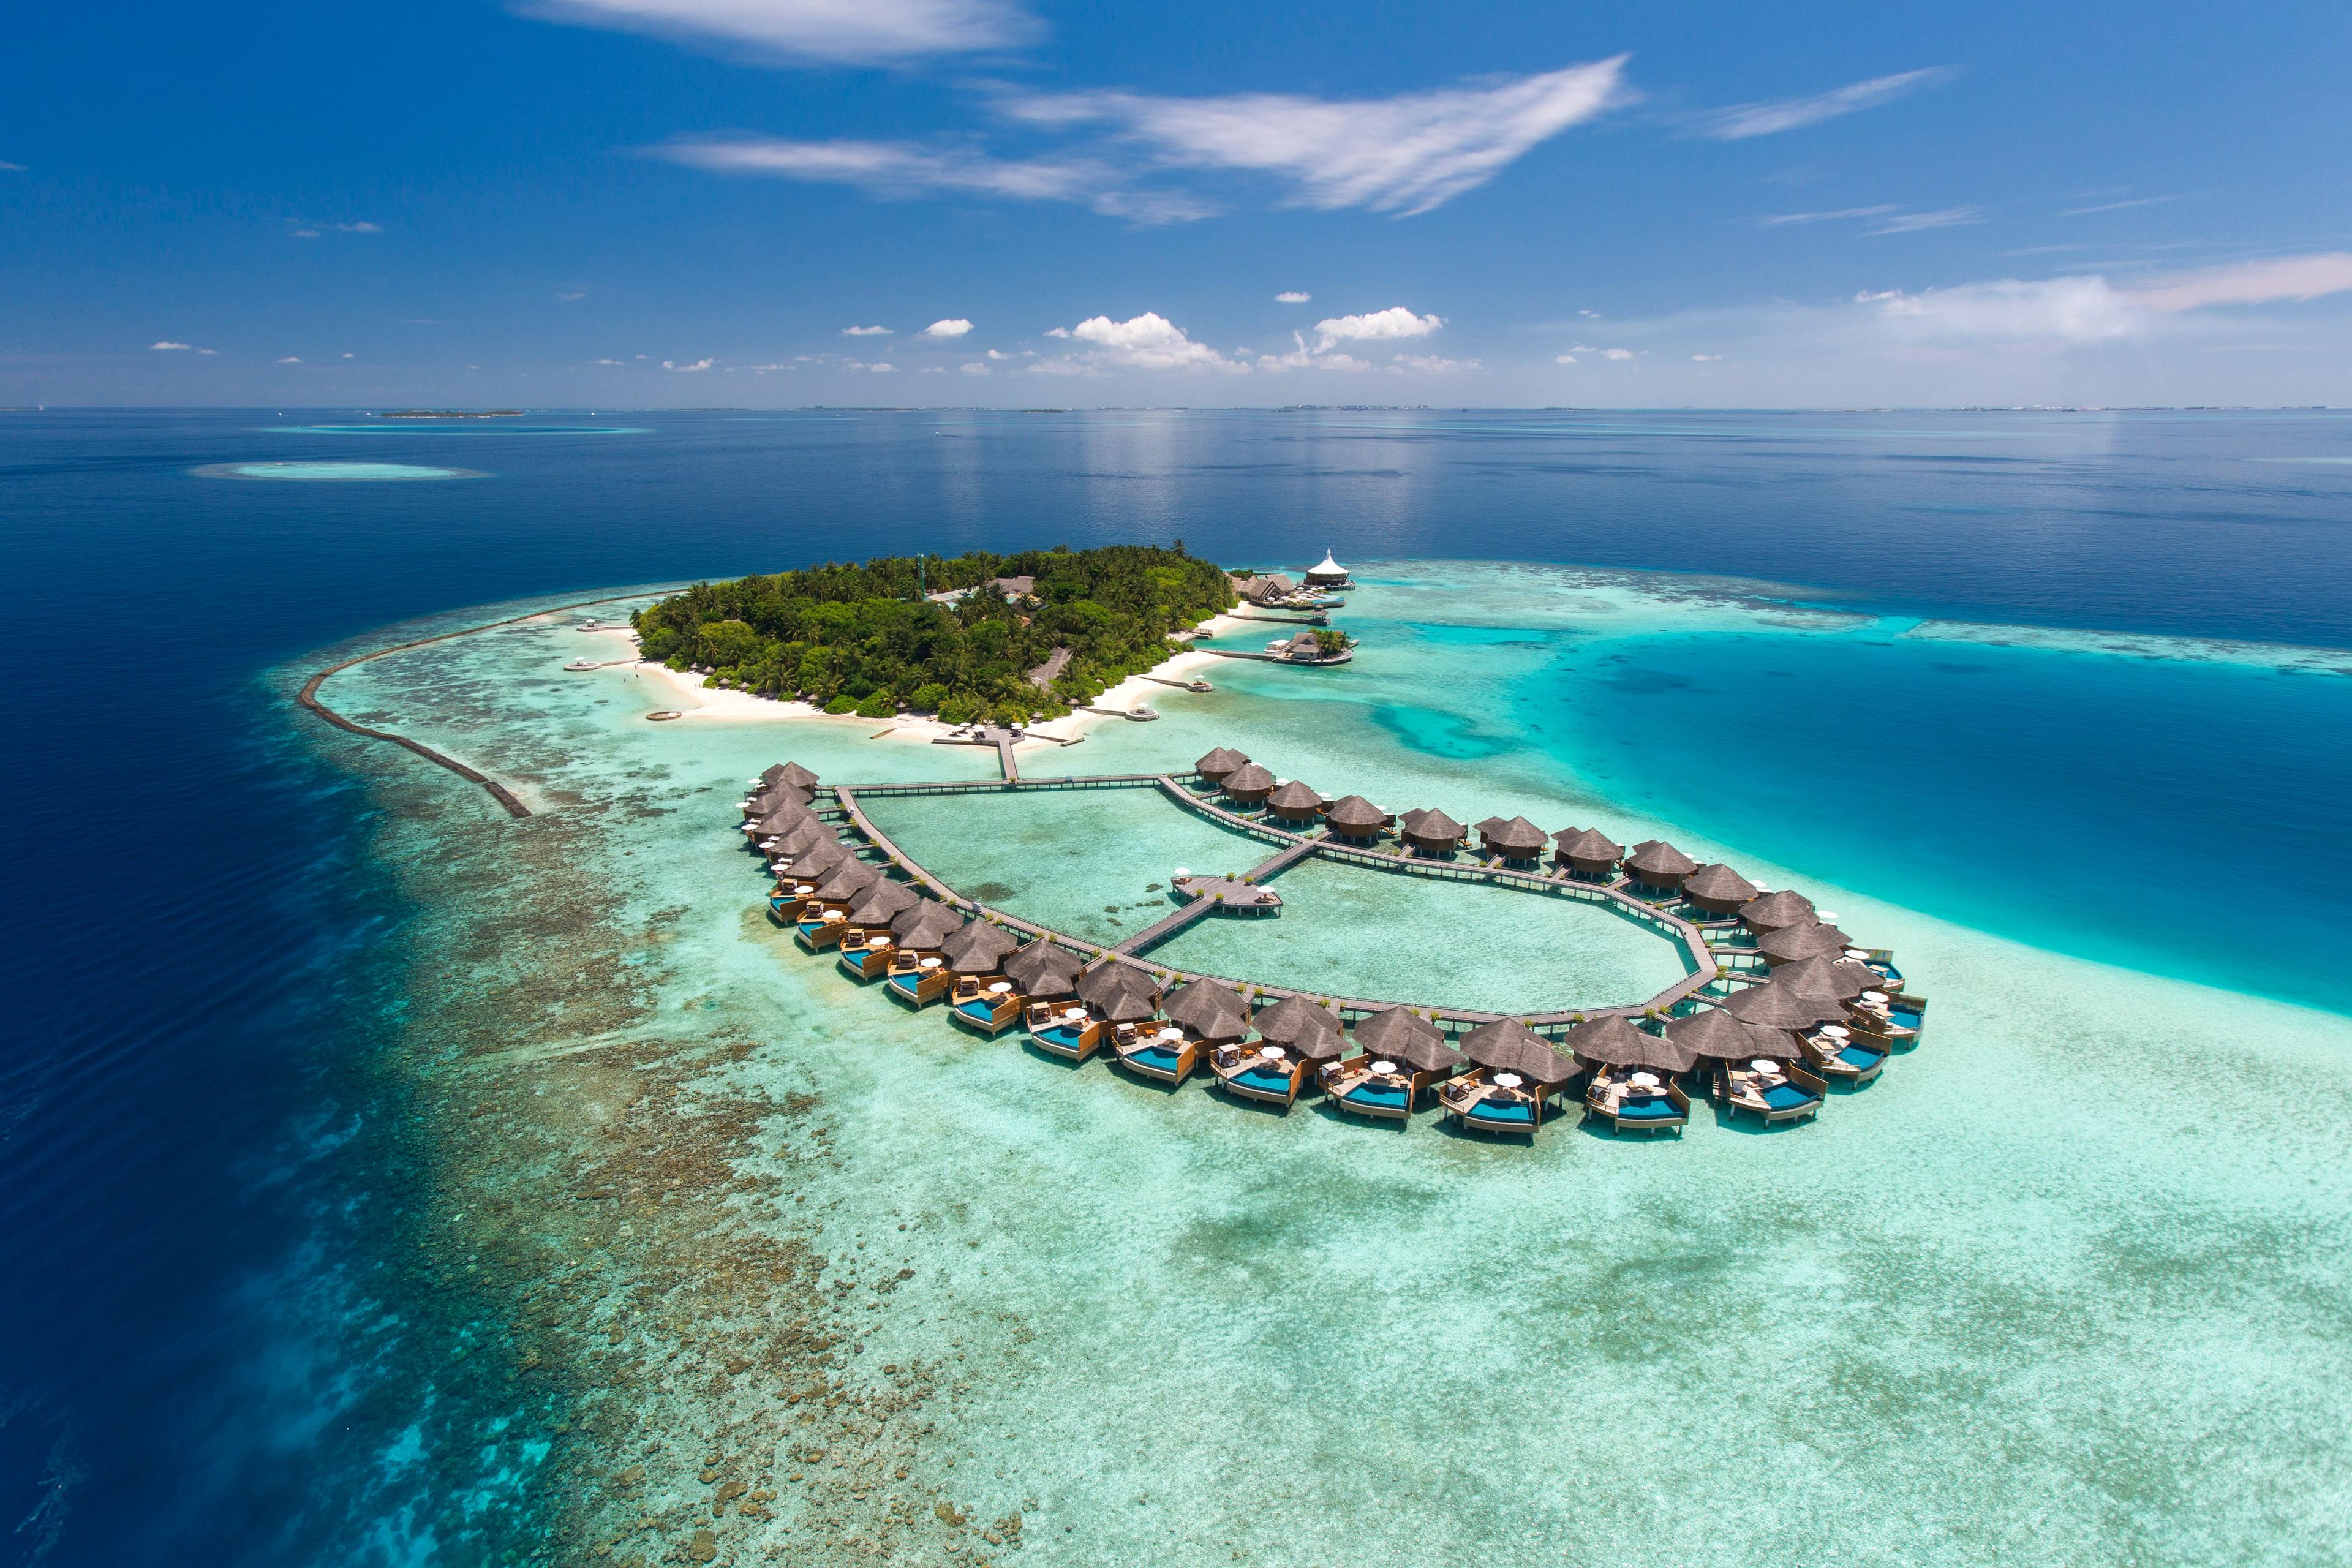 Limited time offer 40% off at luxury 5 Star Baros Maldives